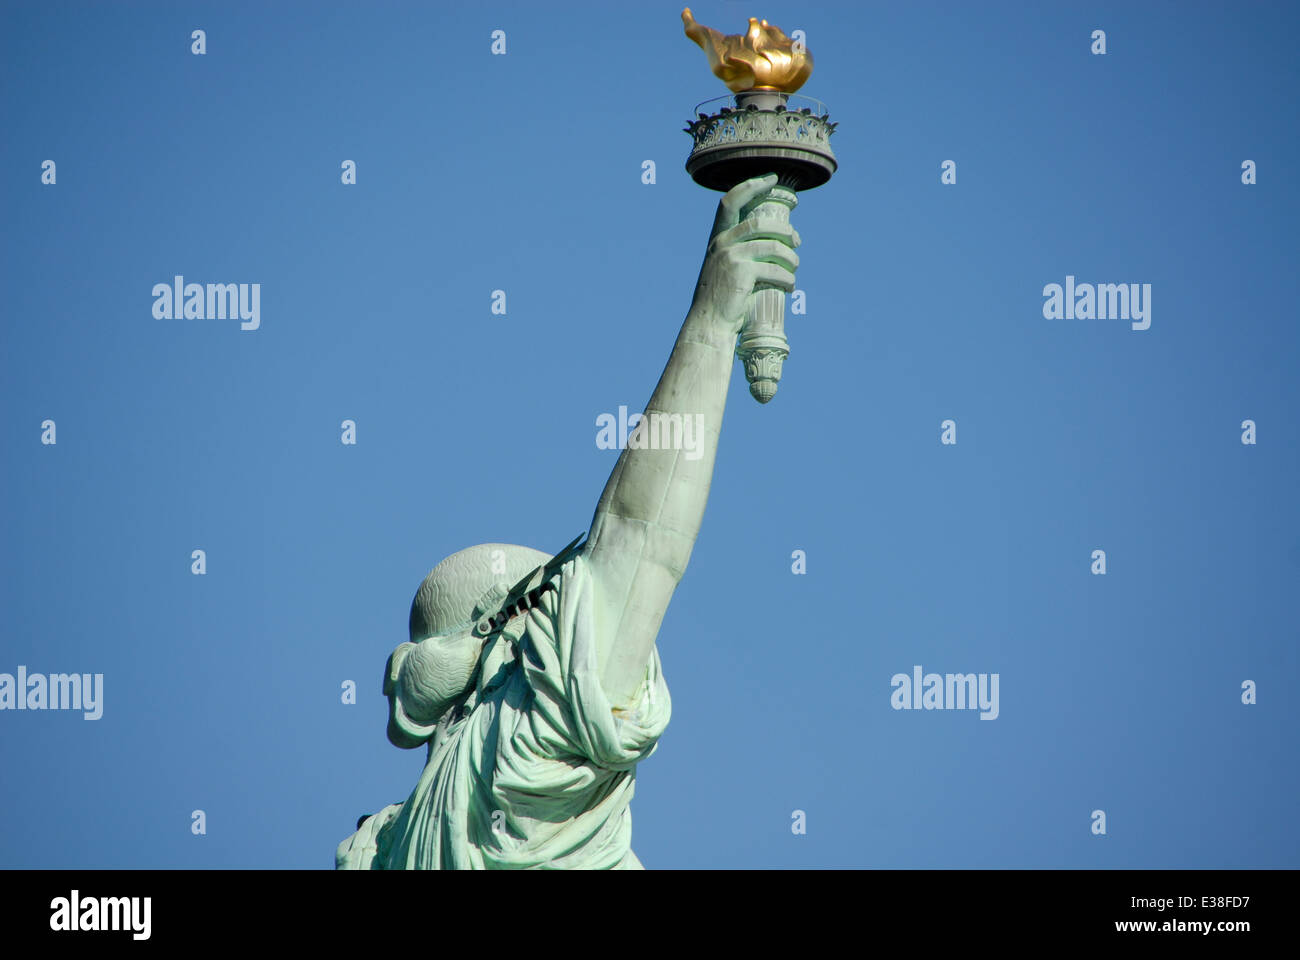 statue of liberty in new york, usa Stock Photo